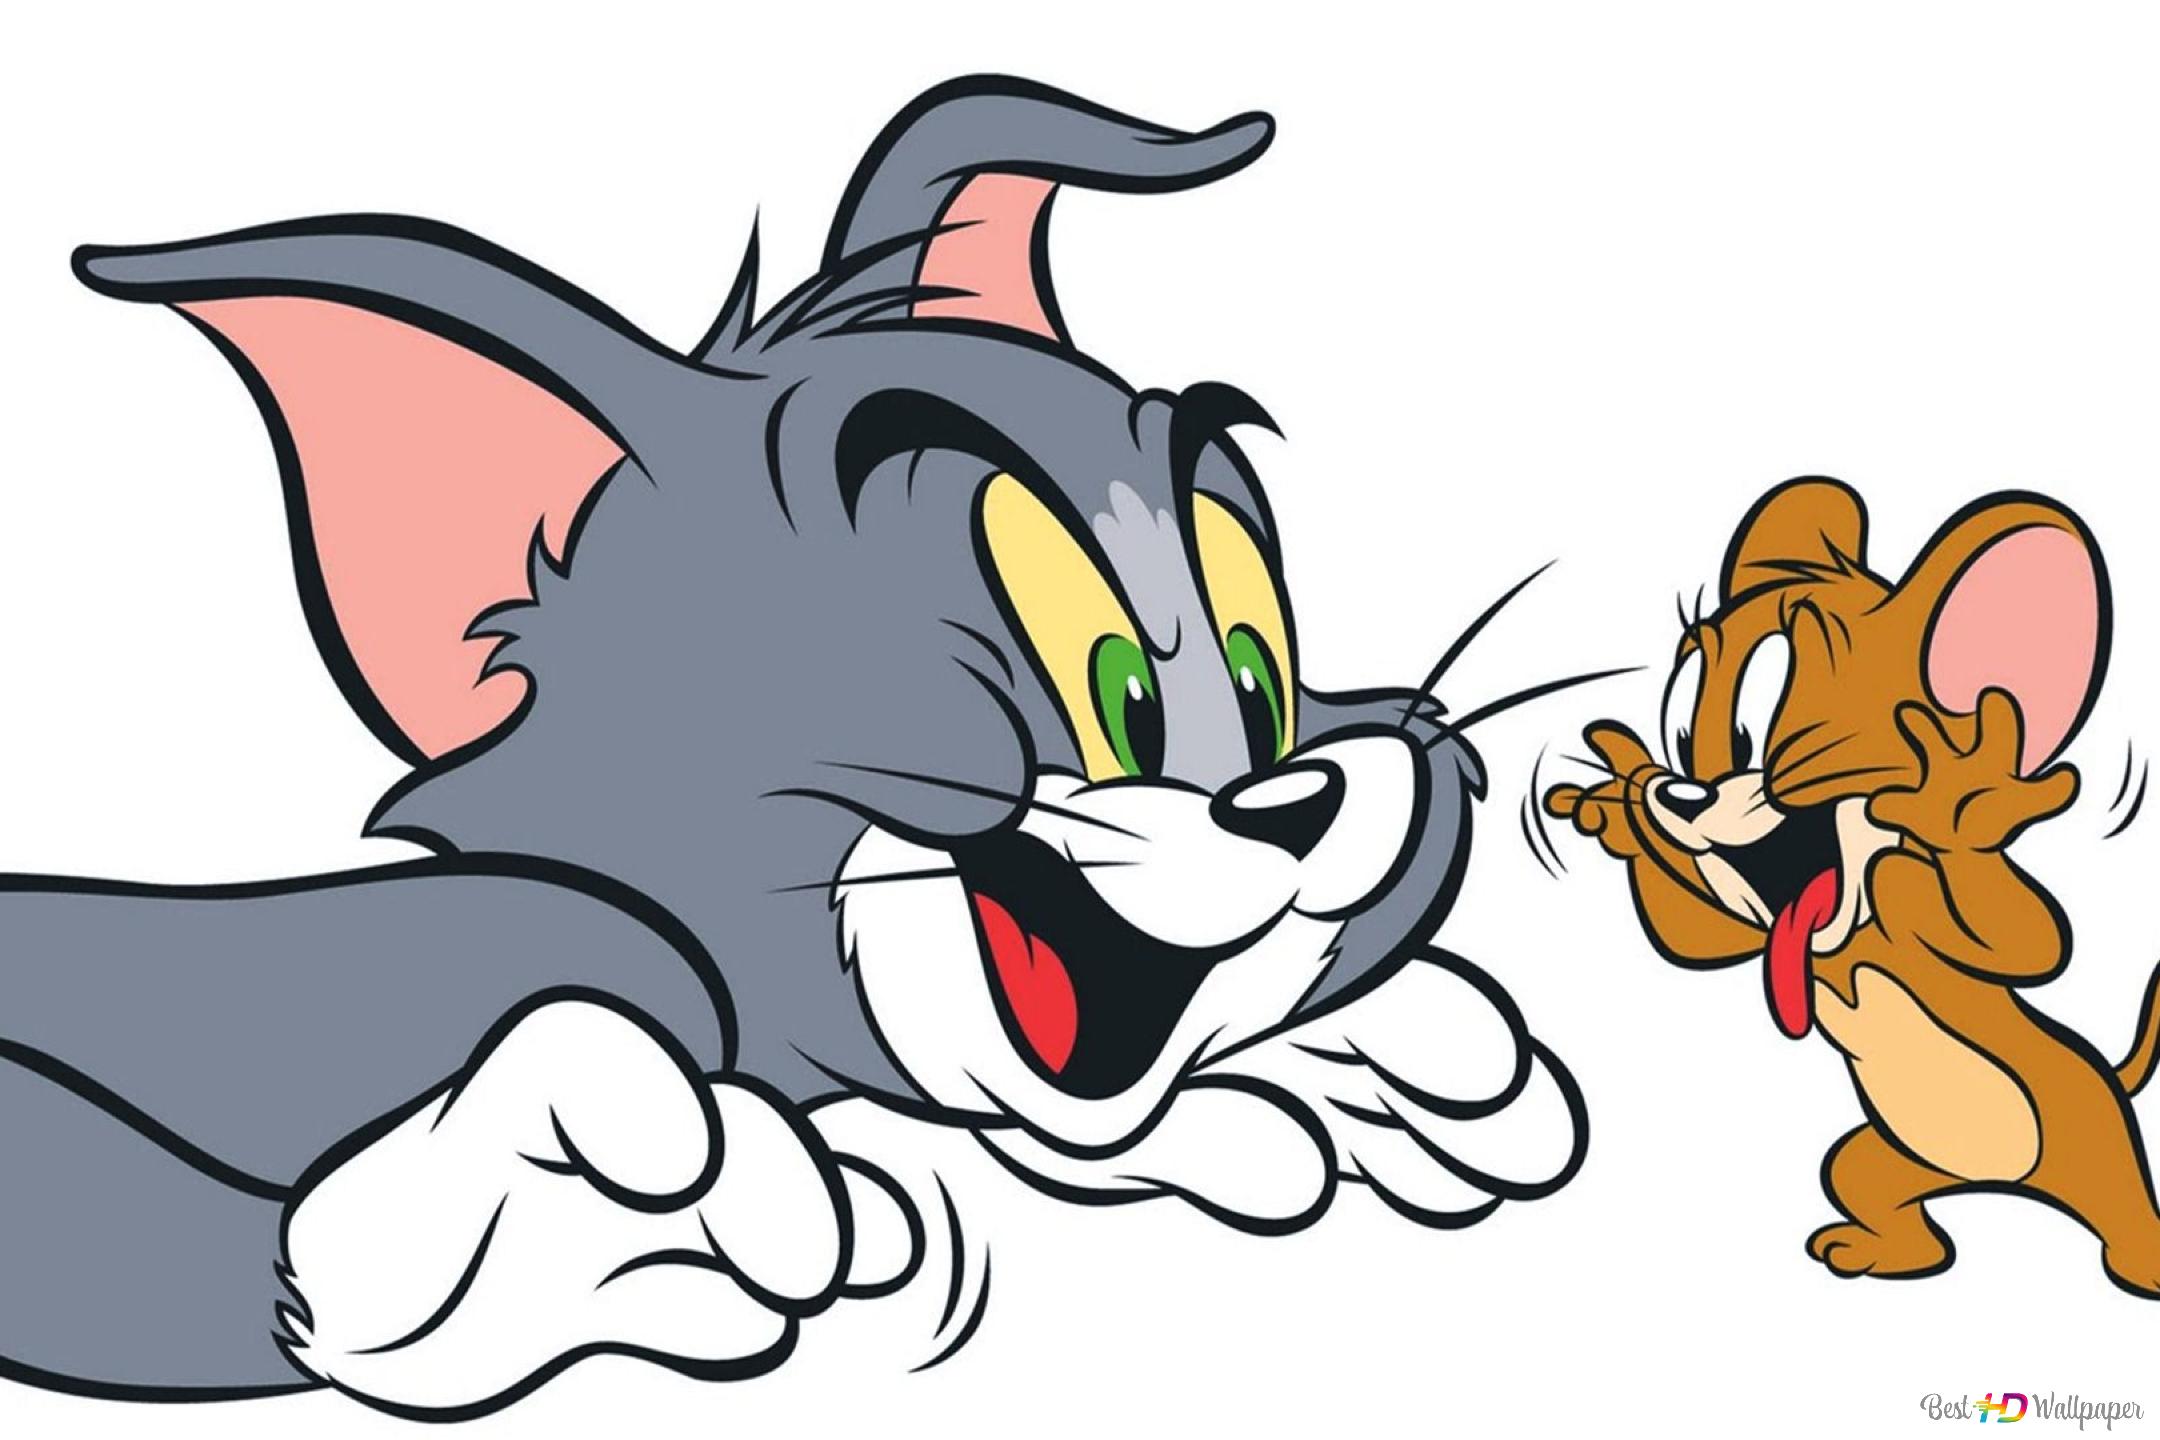 Tom And Jerry Funny Wallpapers